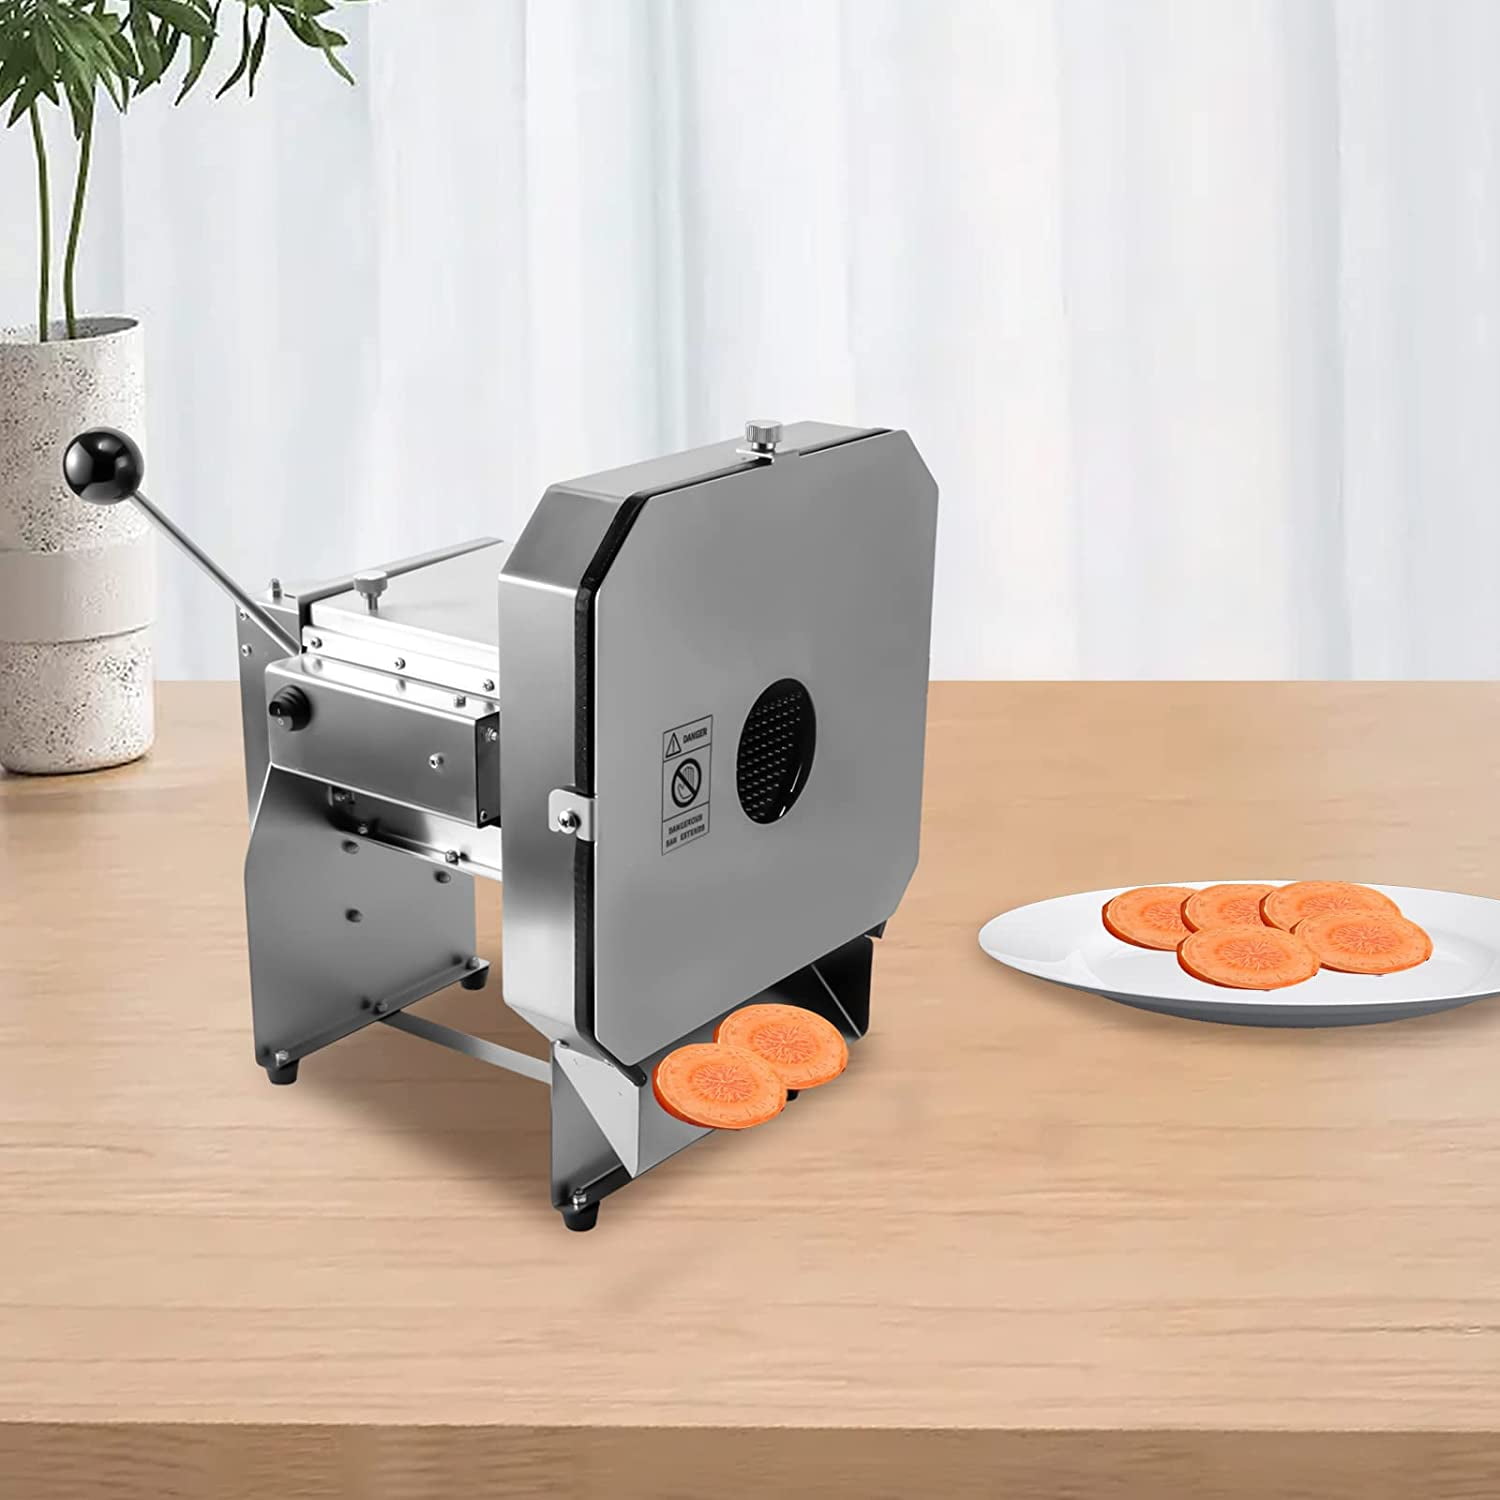 Multi Purpose Vegetable Slicer Cuts Set - Buy Today Get 55% Discount -  MOLOOCO